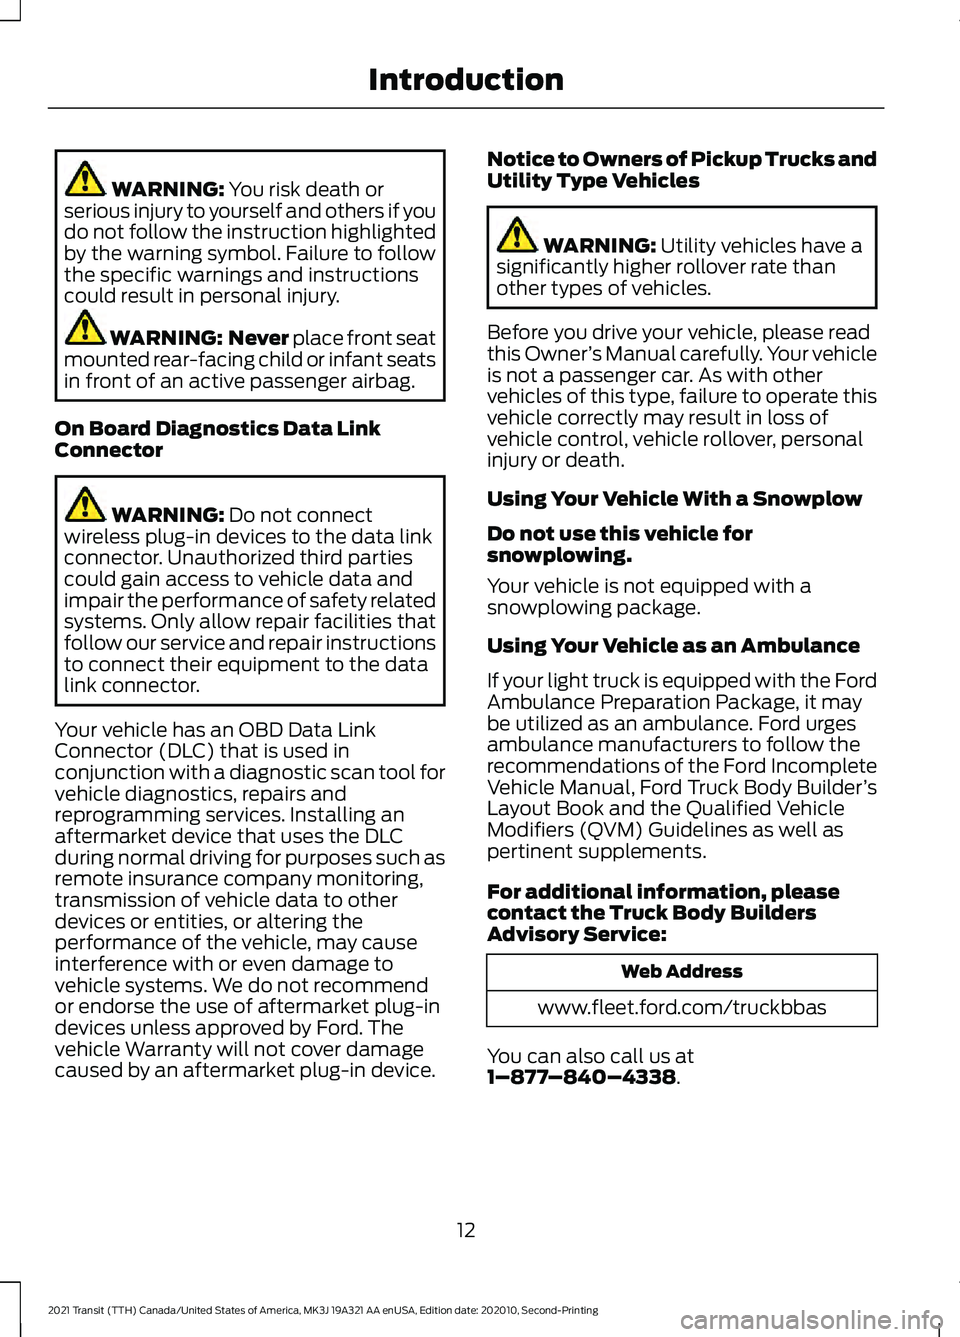 FORD TRANSIT 2021 User Guide WARNING: You risk death or
serious injury to yourself and others if you
do not follow the instruction highlighted
by the warning symbol. Failure to follow
the specific warnings and instructions
could 